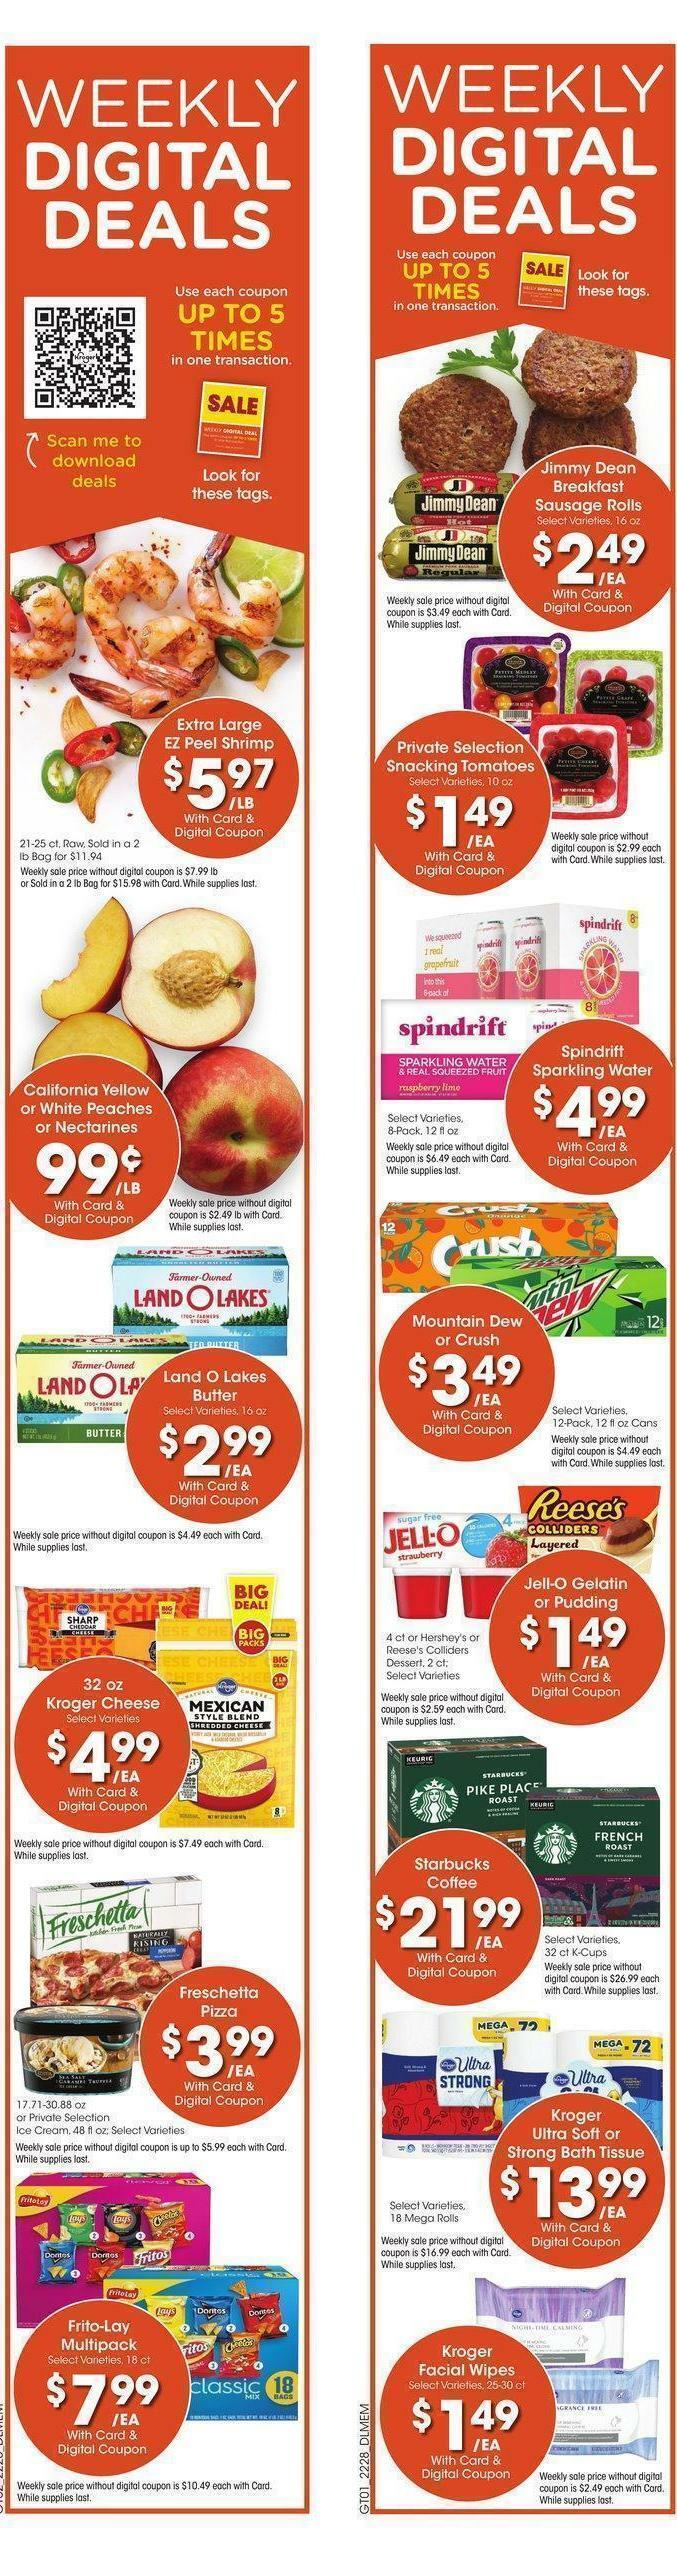 Kroger Weekly Ad from August 10